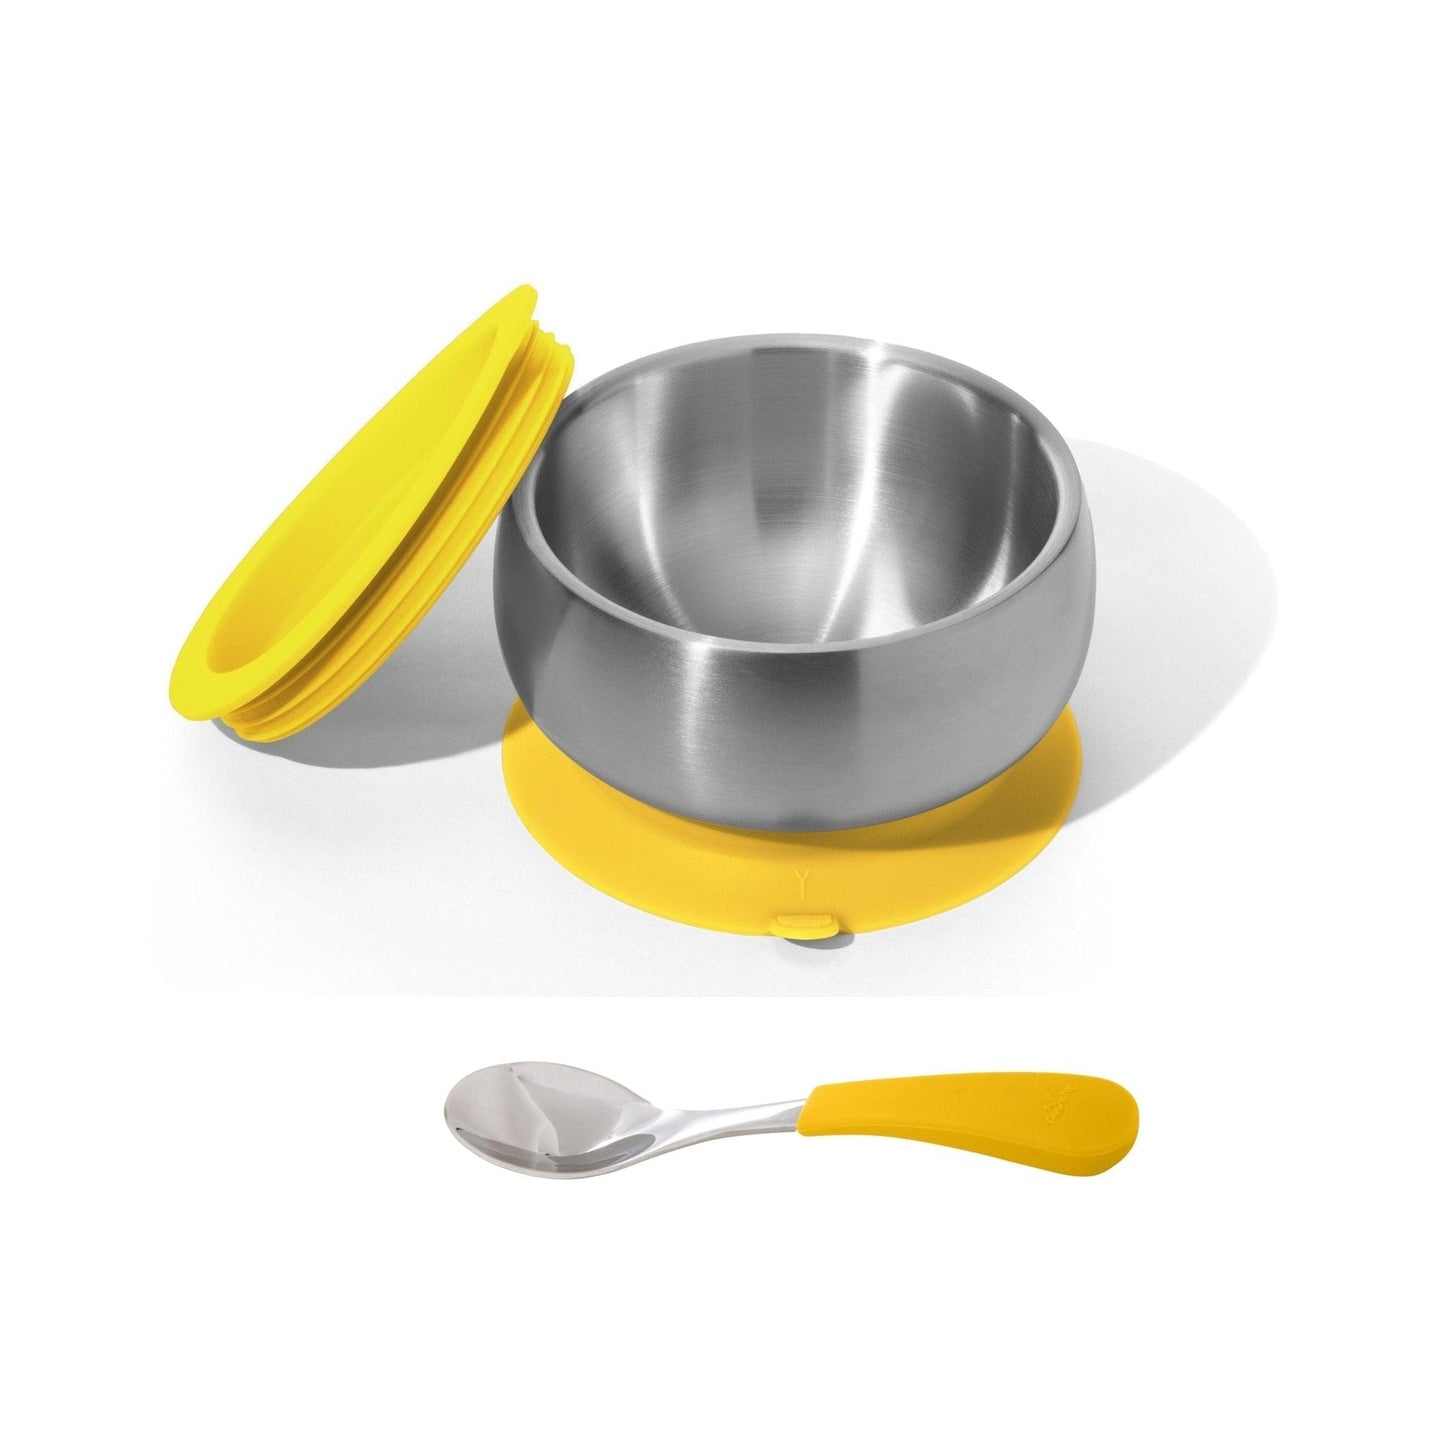 Avanchy Stainless Steel Baby Bowl with Spoon + Air Tight Lid Yellow AVA-SSBLBSPYS